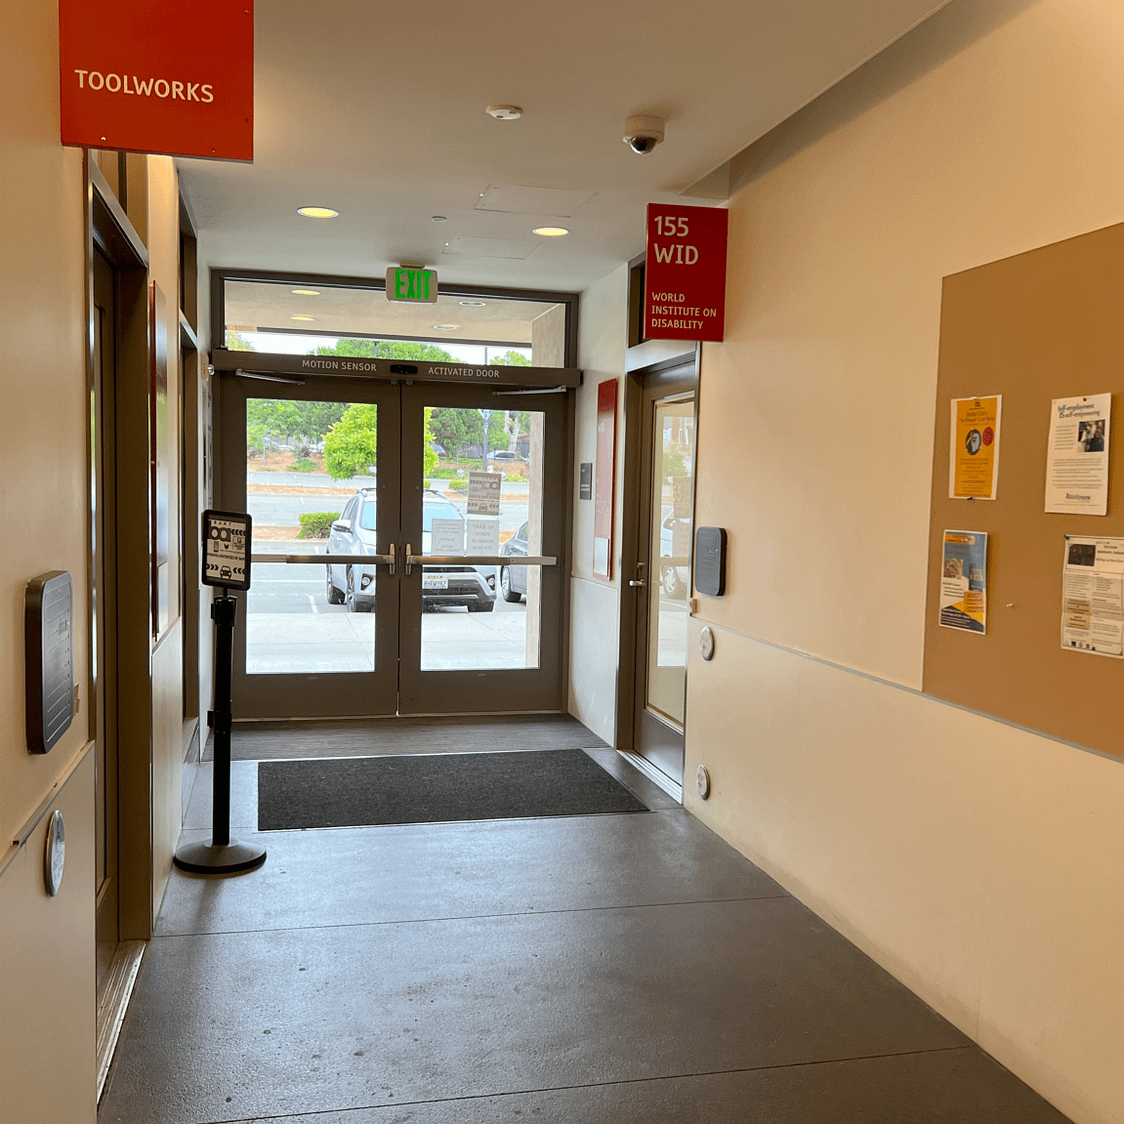 A wide hallway that has doors to World Institutute on Disability, Tool Works, and automatic double doors to exit the building